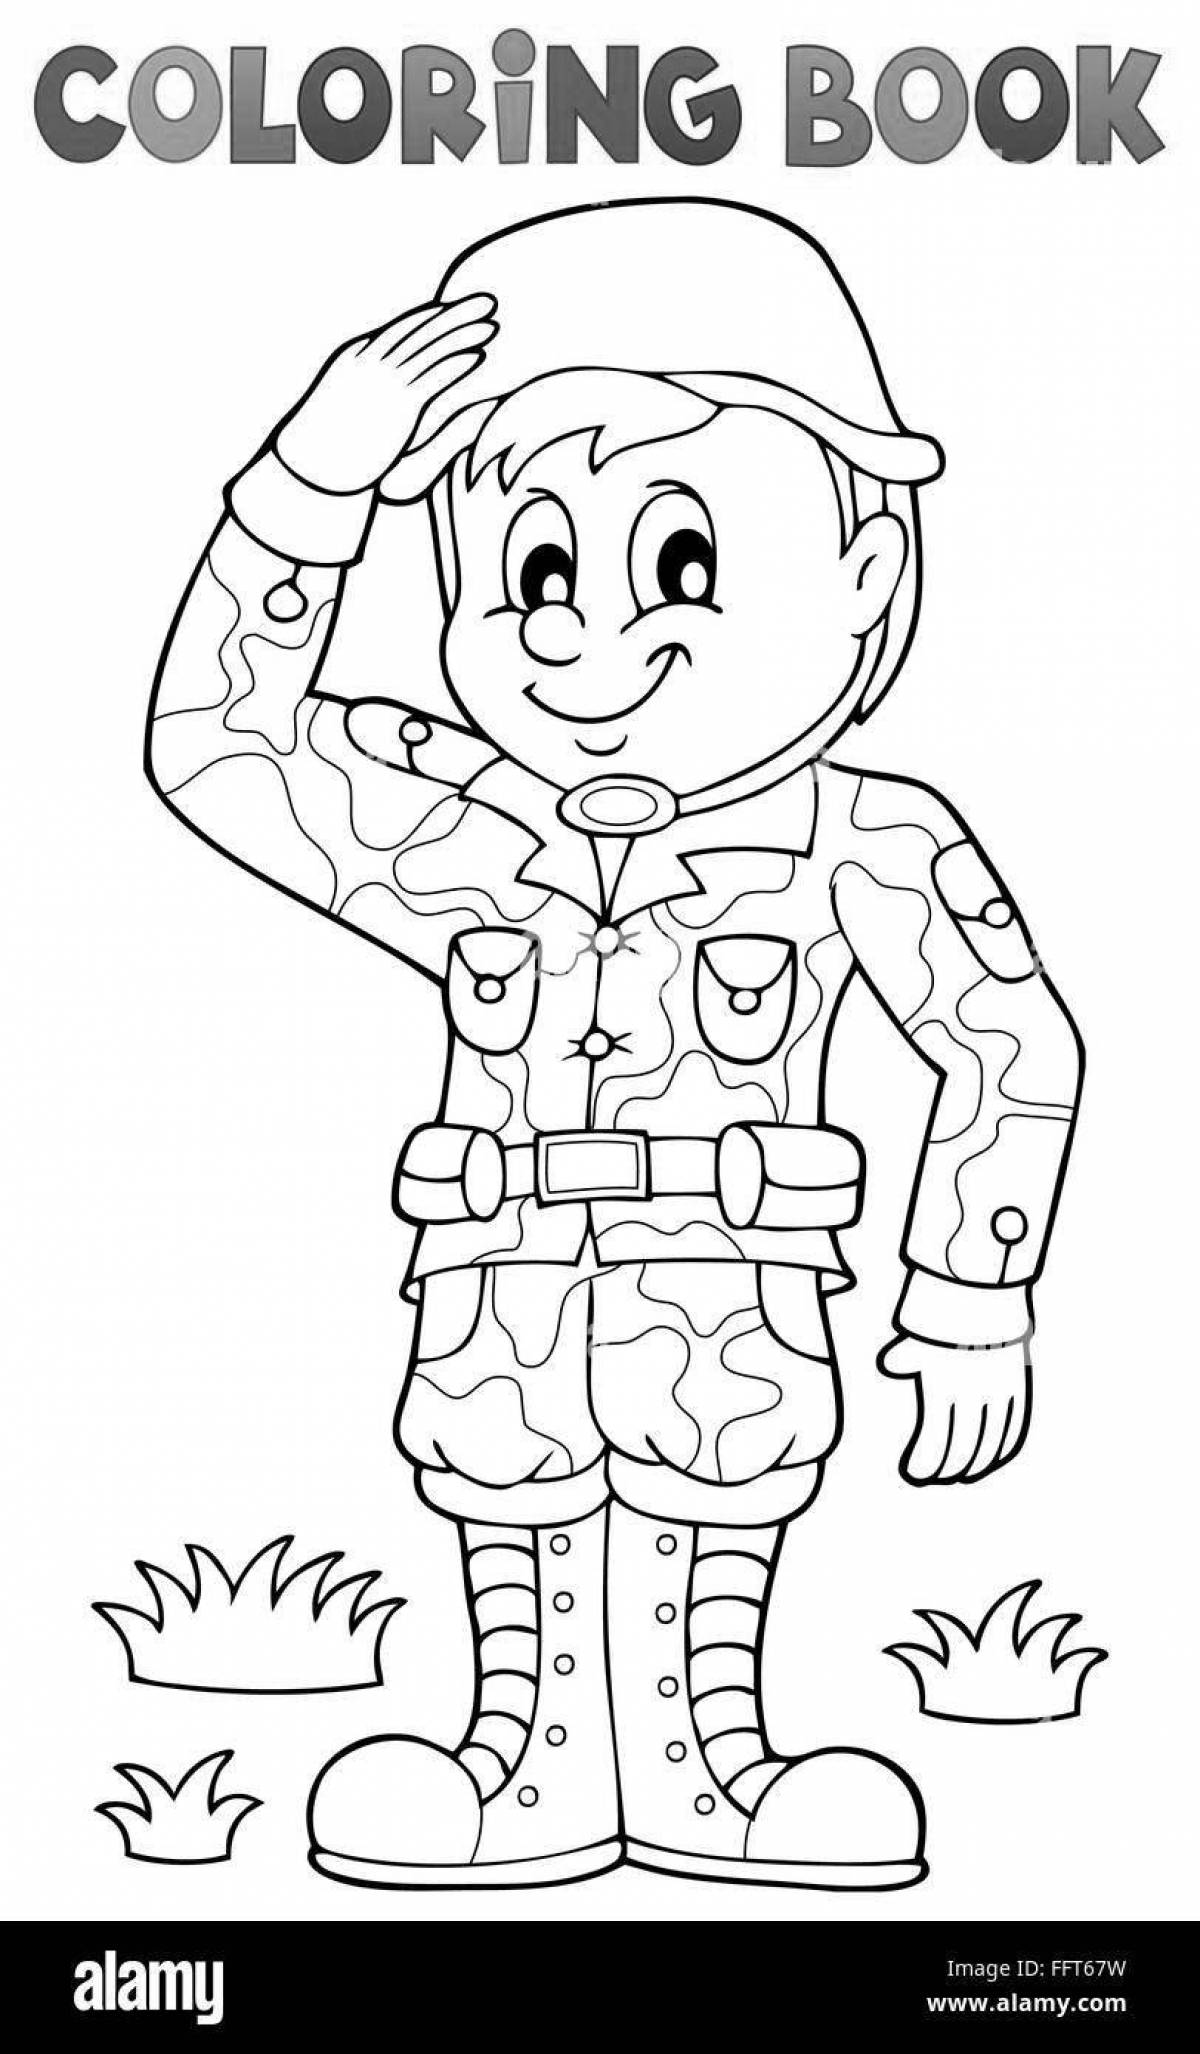 Fun drawing of a toy soldier for kids